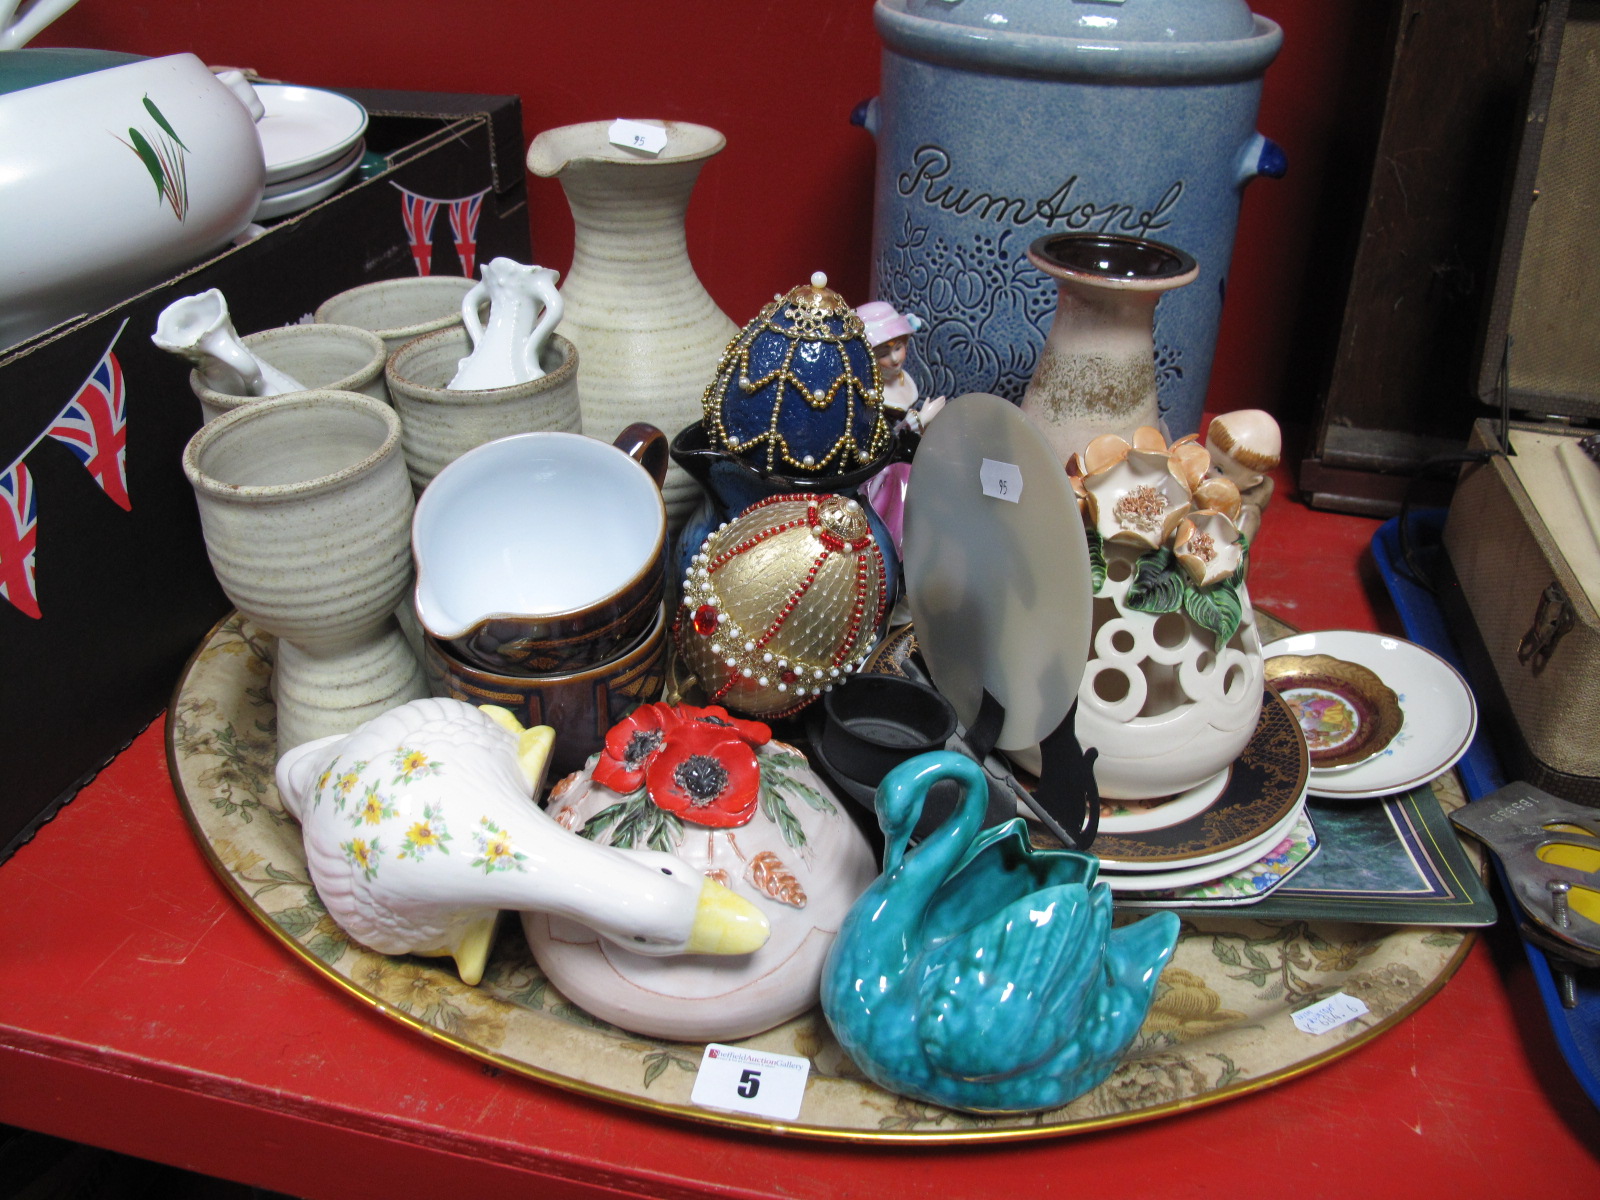 Studio Pottery Stoneware Carafe and Four Goblets, Scheurich vase, decorative pottery, etc:- One Tray